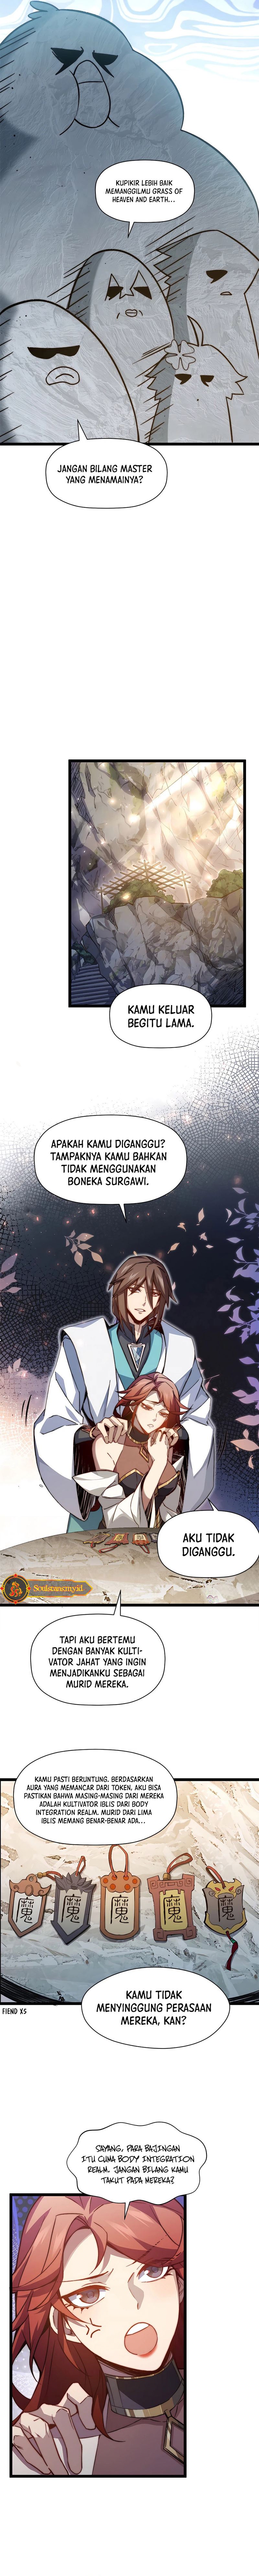 Dilarang COPAS - situs resmi www.mangacanblog.com - Komik top tier providence secretly cultivate for a thousand years 130 - chapter 130 131 Indonesia top tier providence secretly cultivate for a thousand years 130 - chapter 130 Terbaru 3|Baca Manga Komik Indonesia|Mangacan